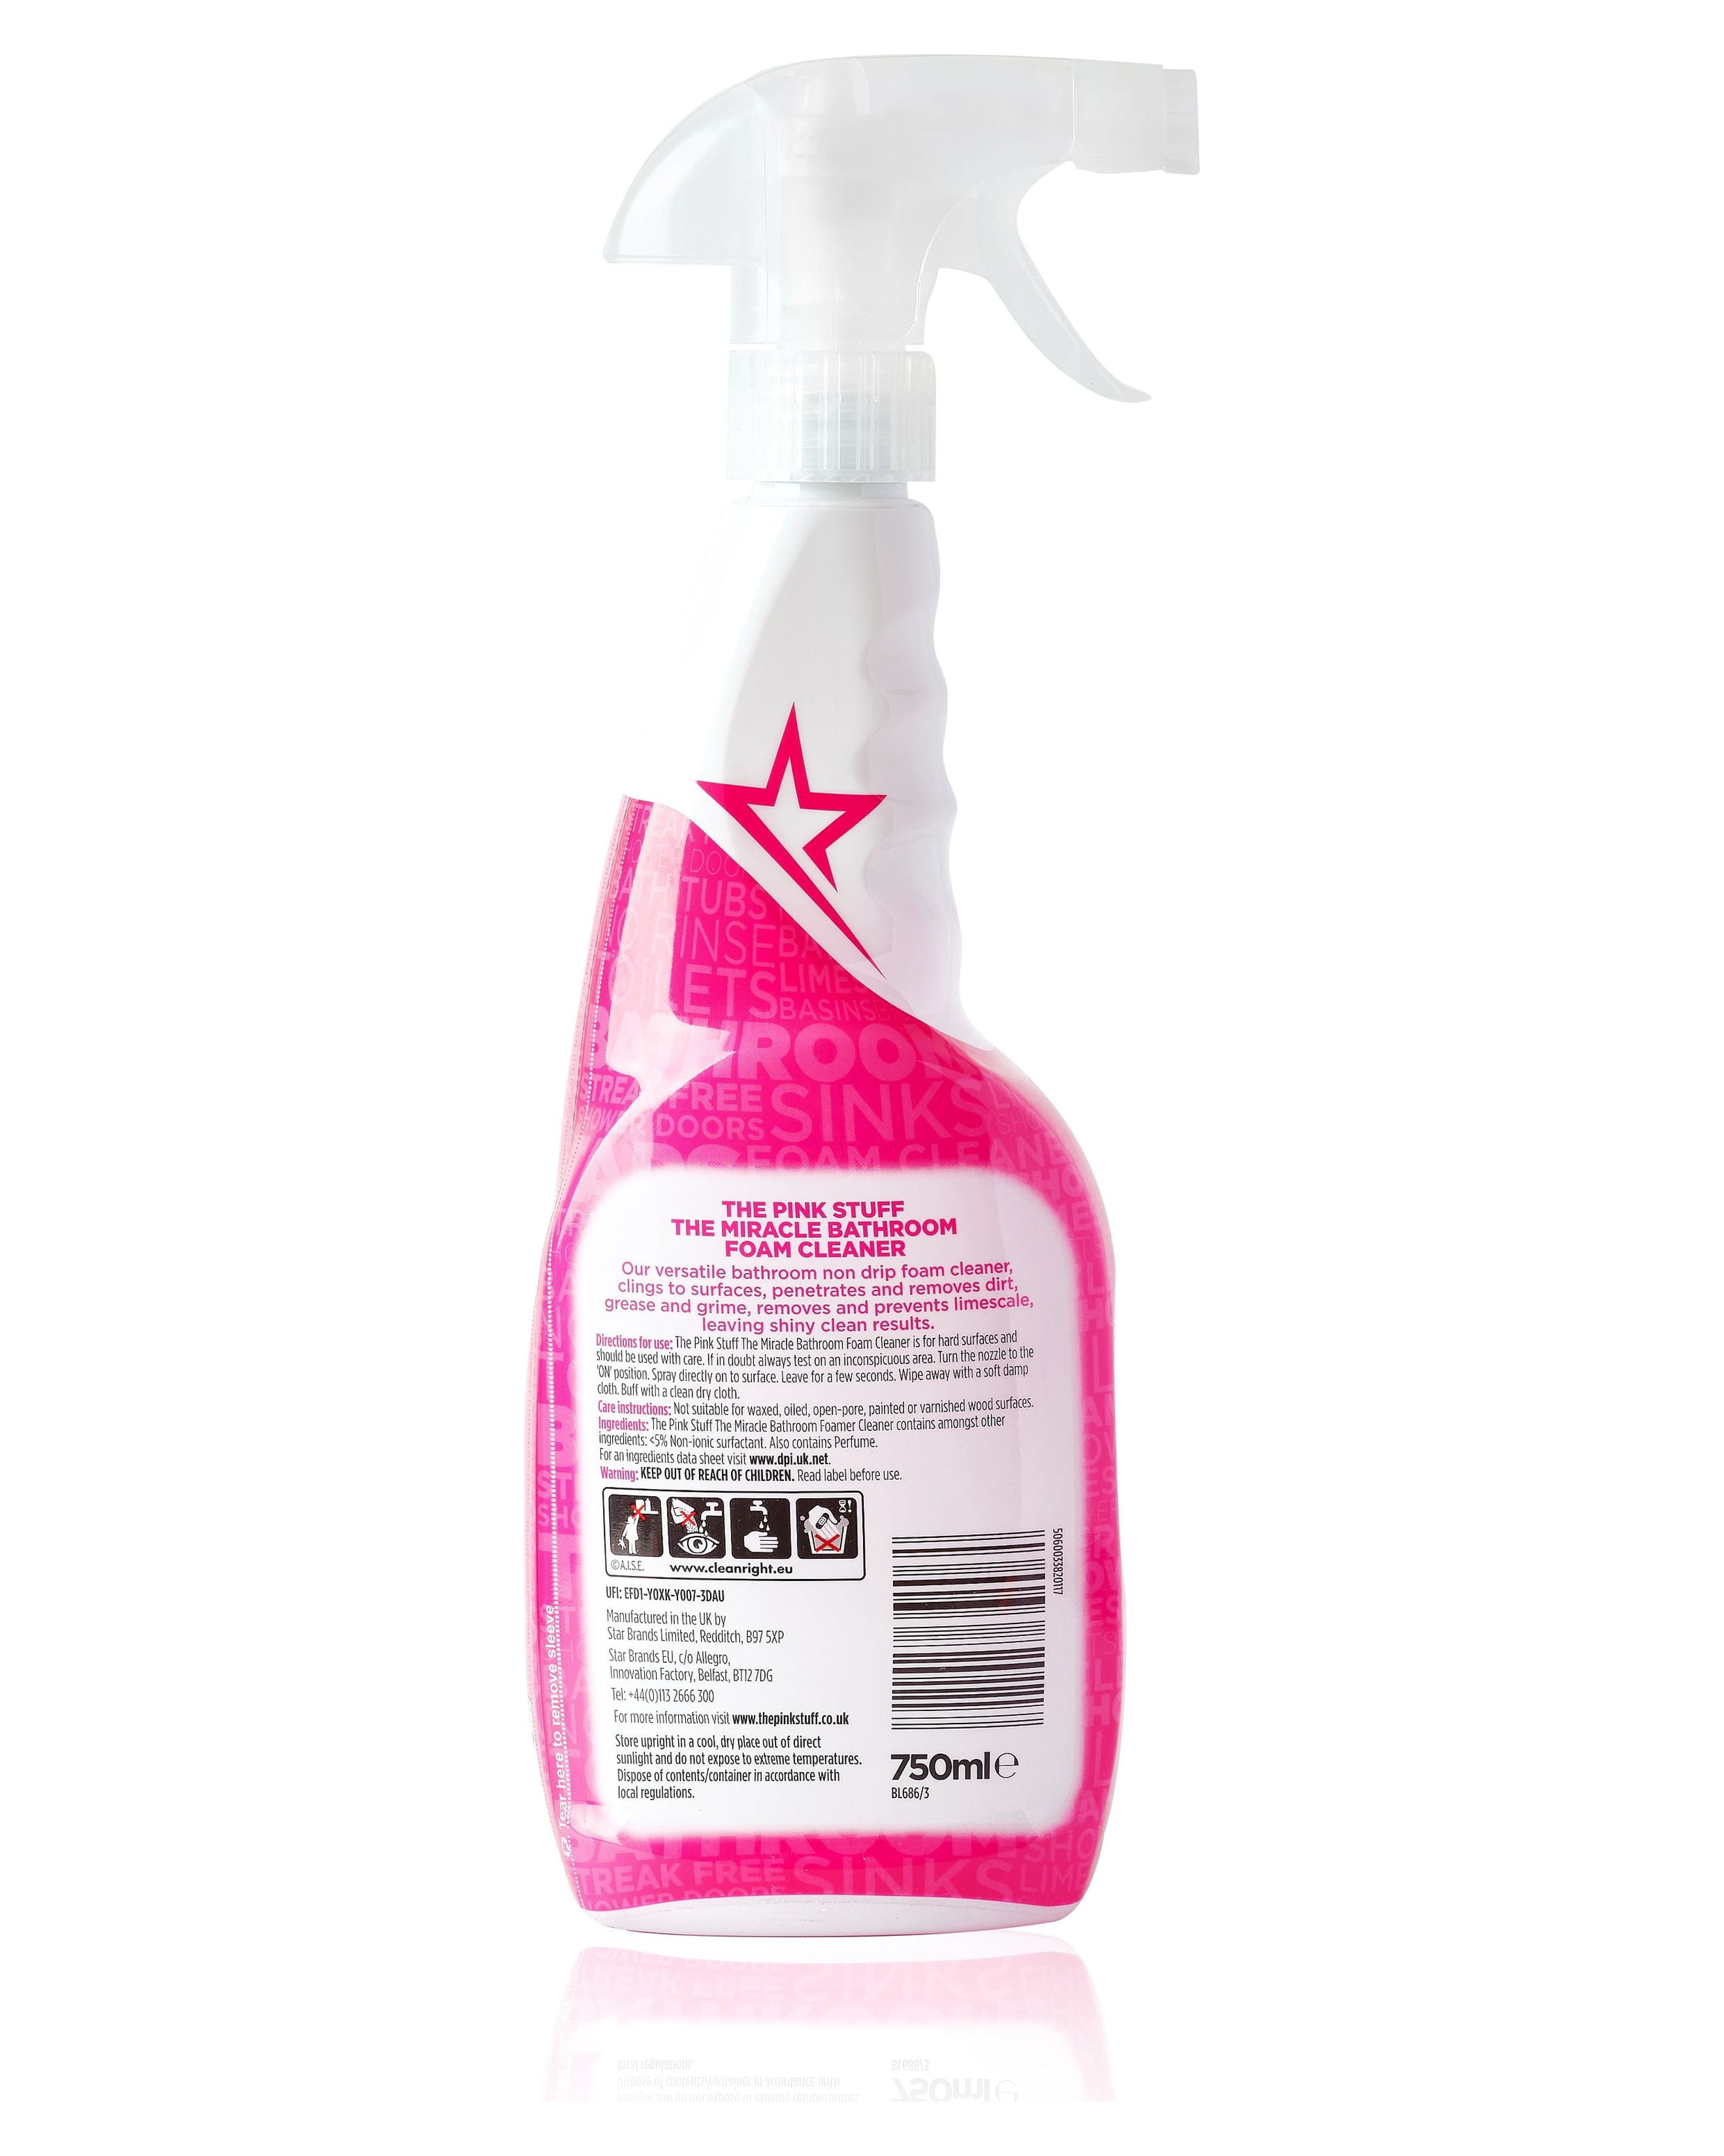 Bathroom cleaning made easy with The Power of Pink